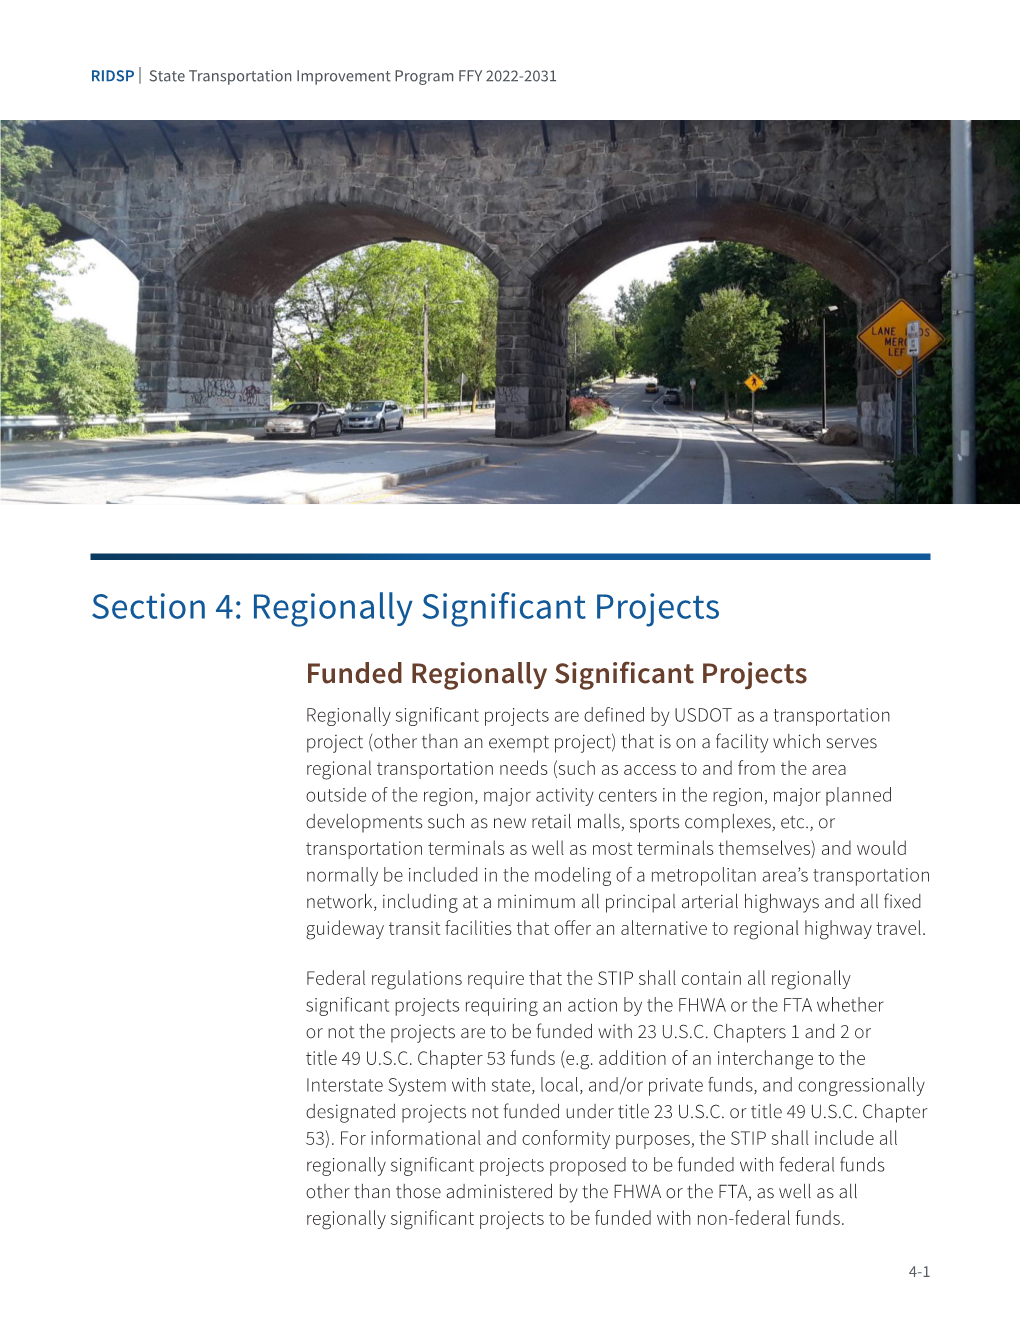 Regionally Significant Projects